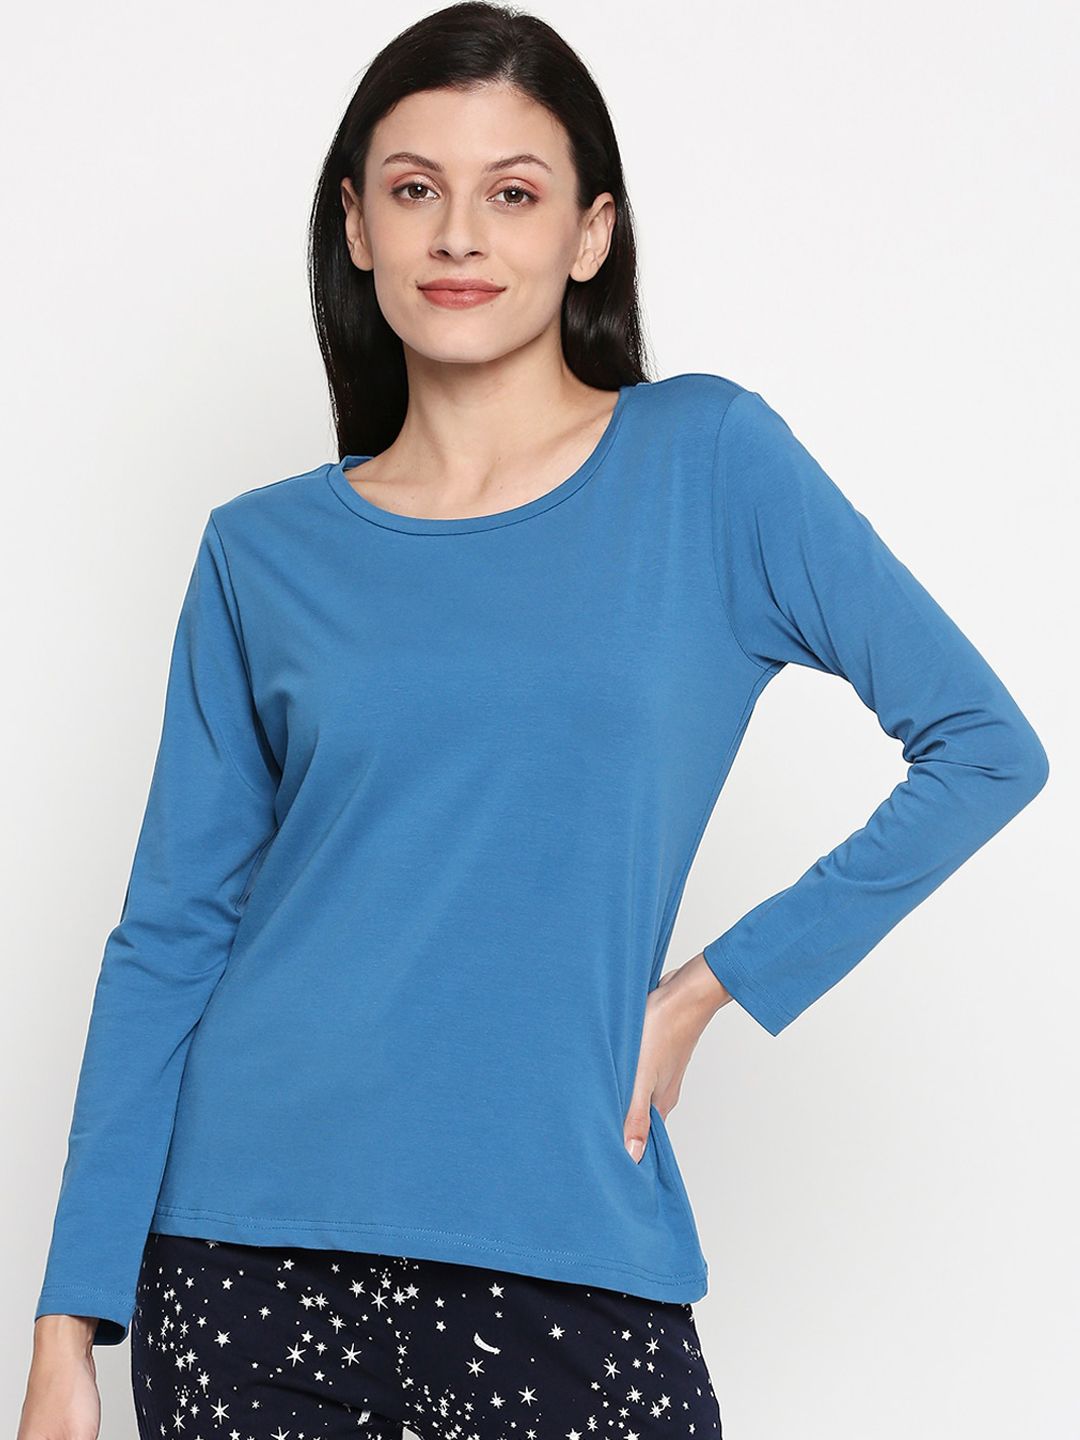 Dreamz by Pantaloons Women Blue Solid Lounge tshirt Price in India